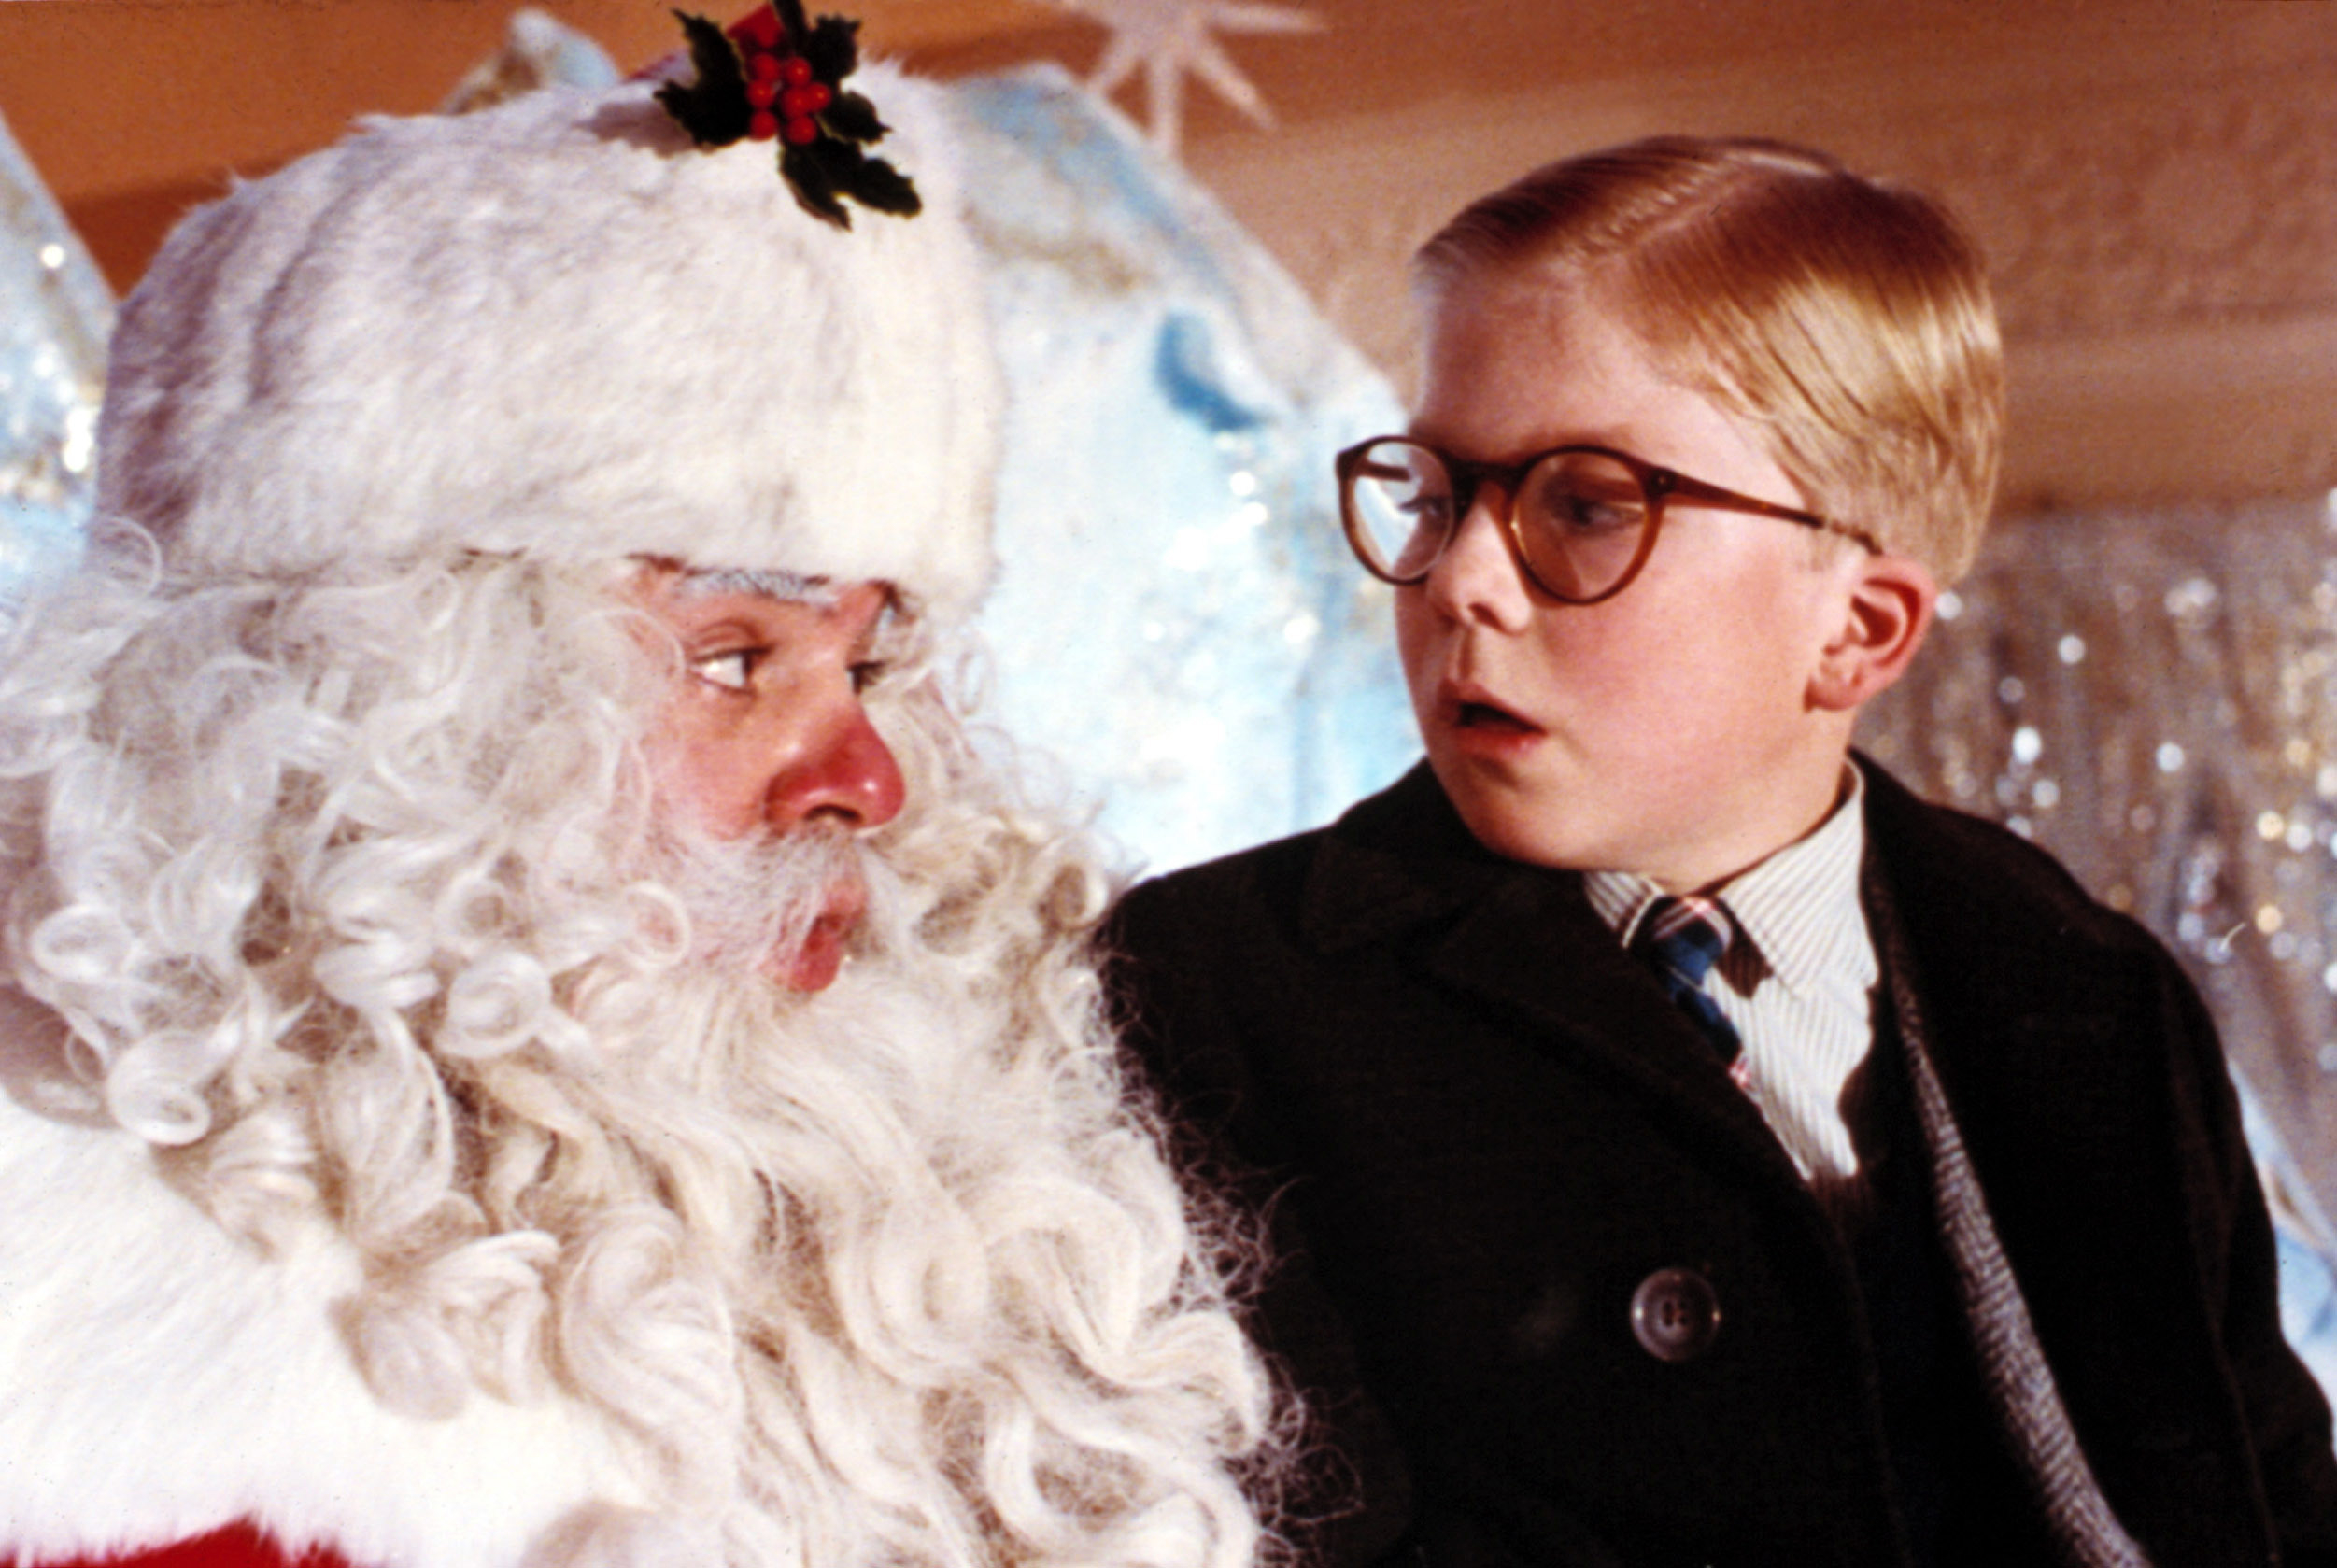 Screenshot from &quot;A Christmas Story&quot;